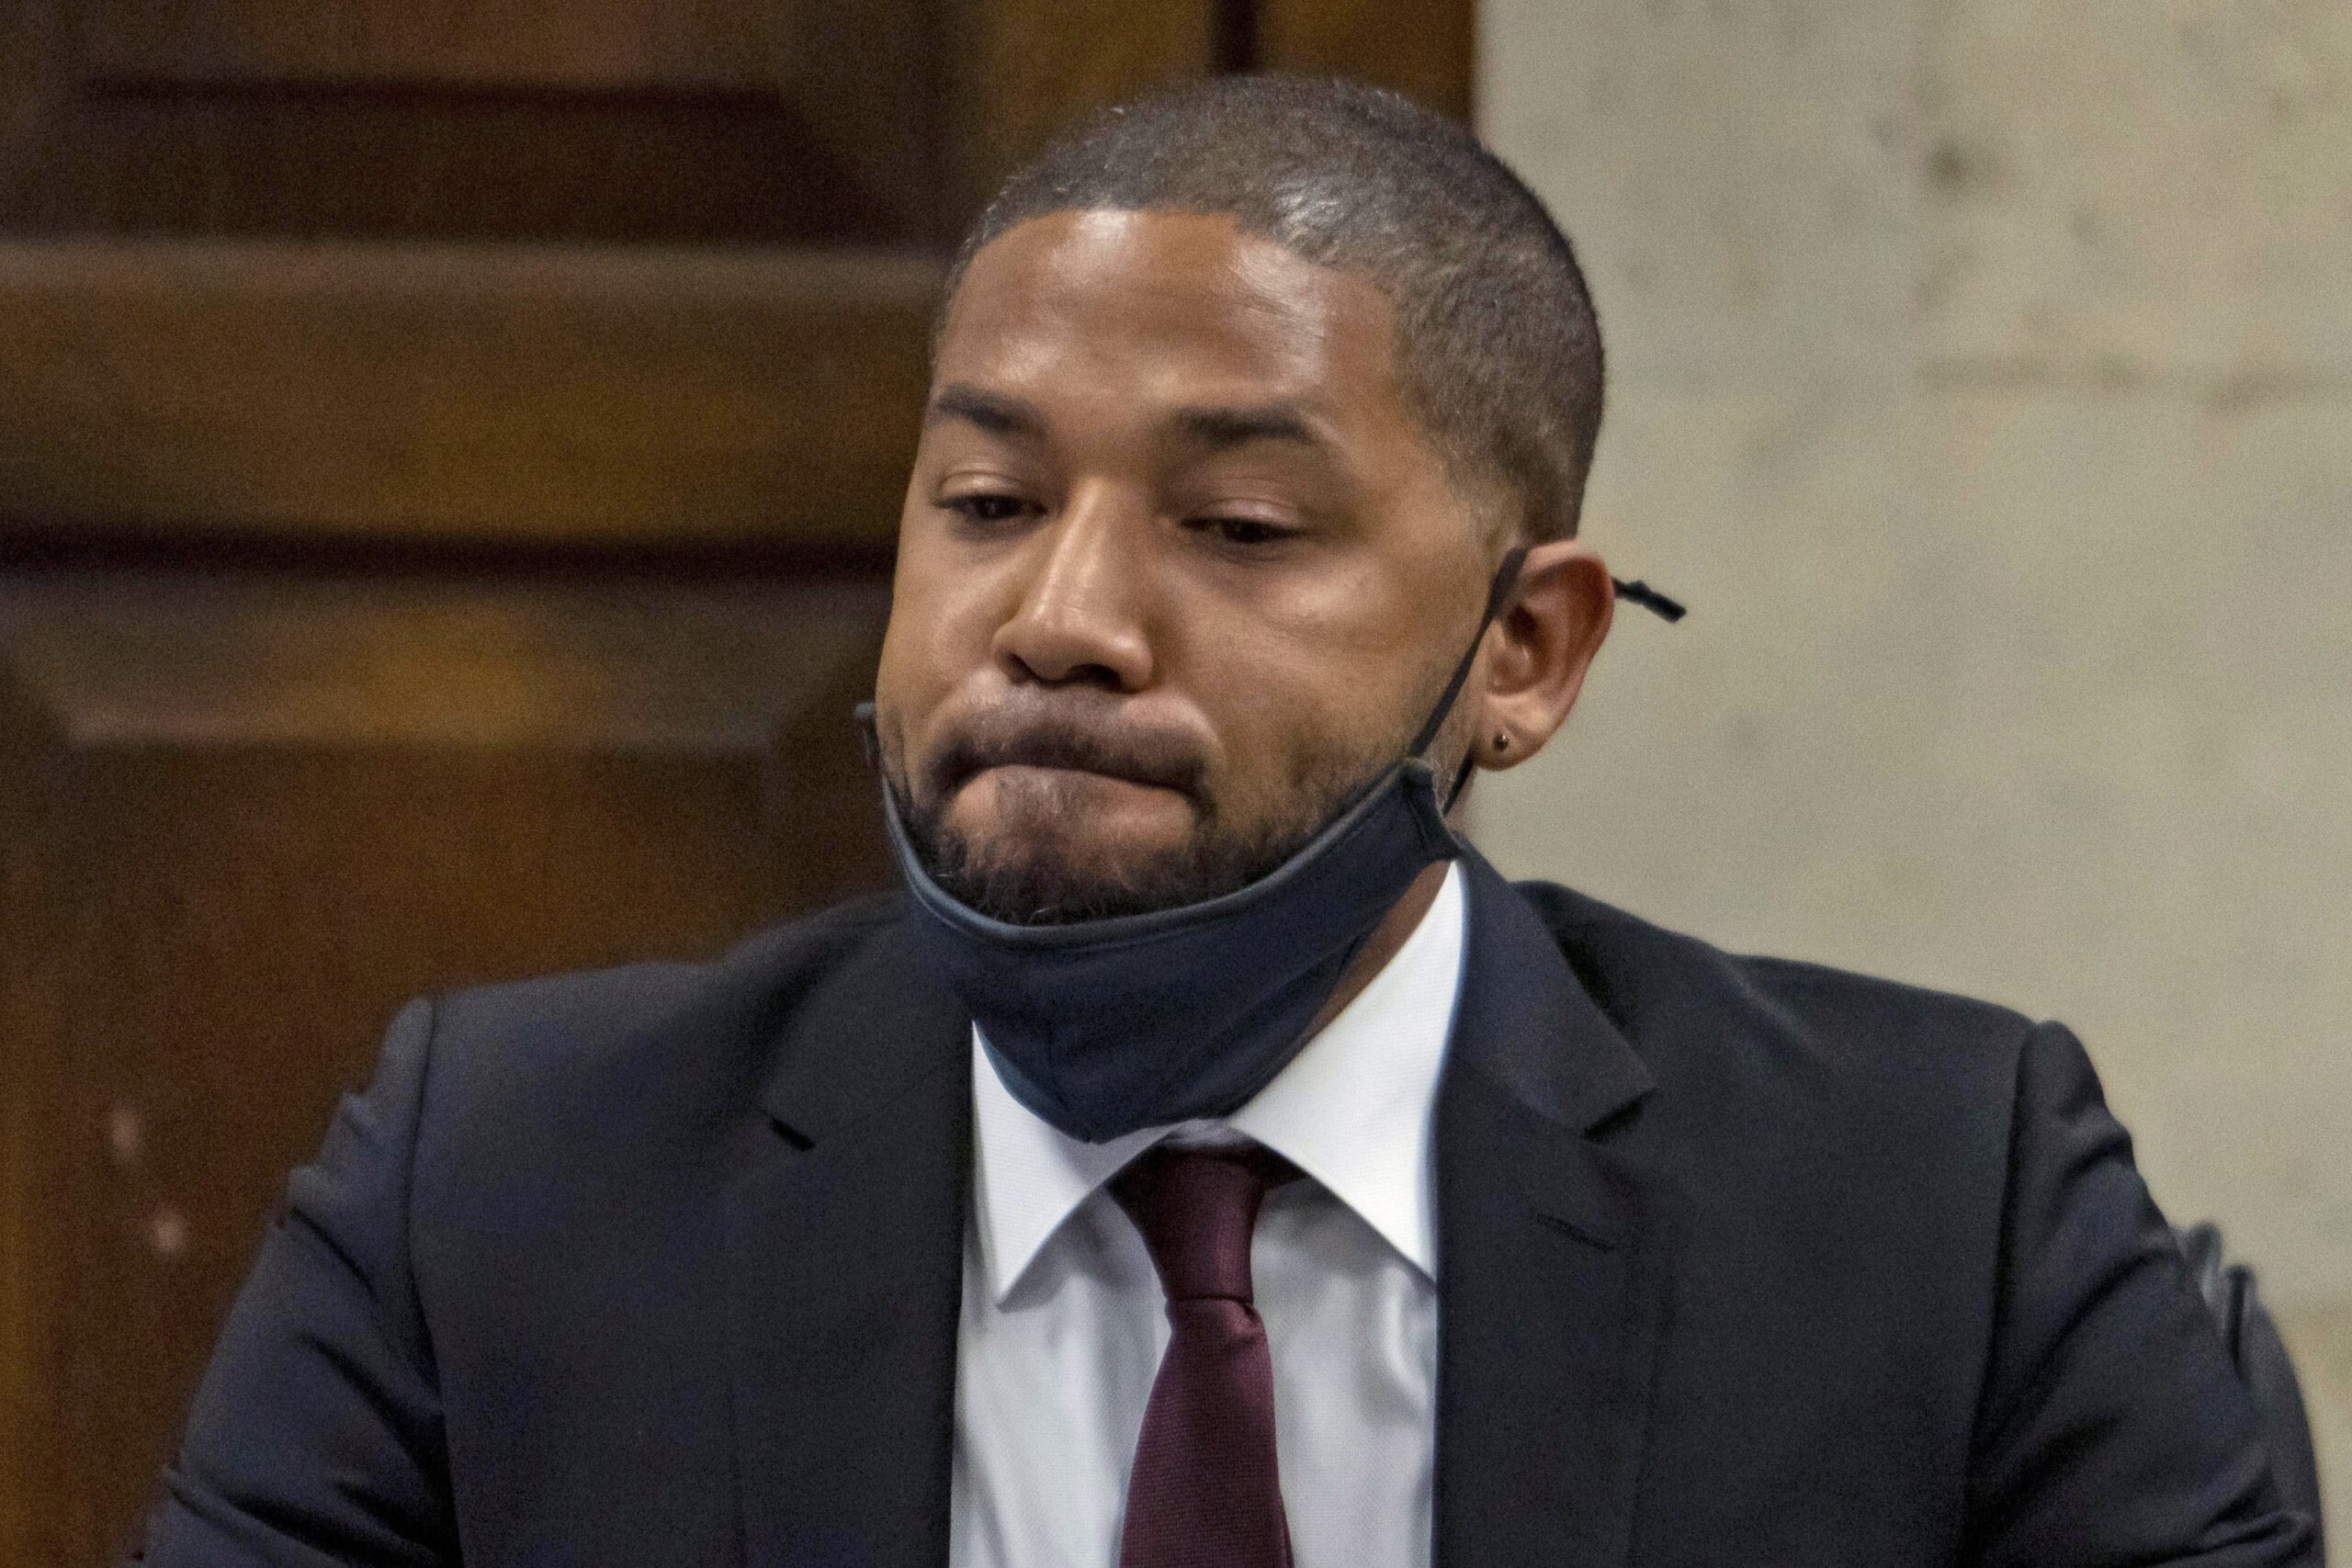 Illinois Supreme Court to hear actor Jussie Smollett appeal of conviction for staging racist attack - WTOP News